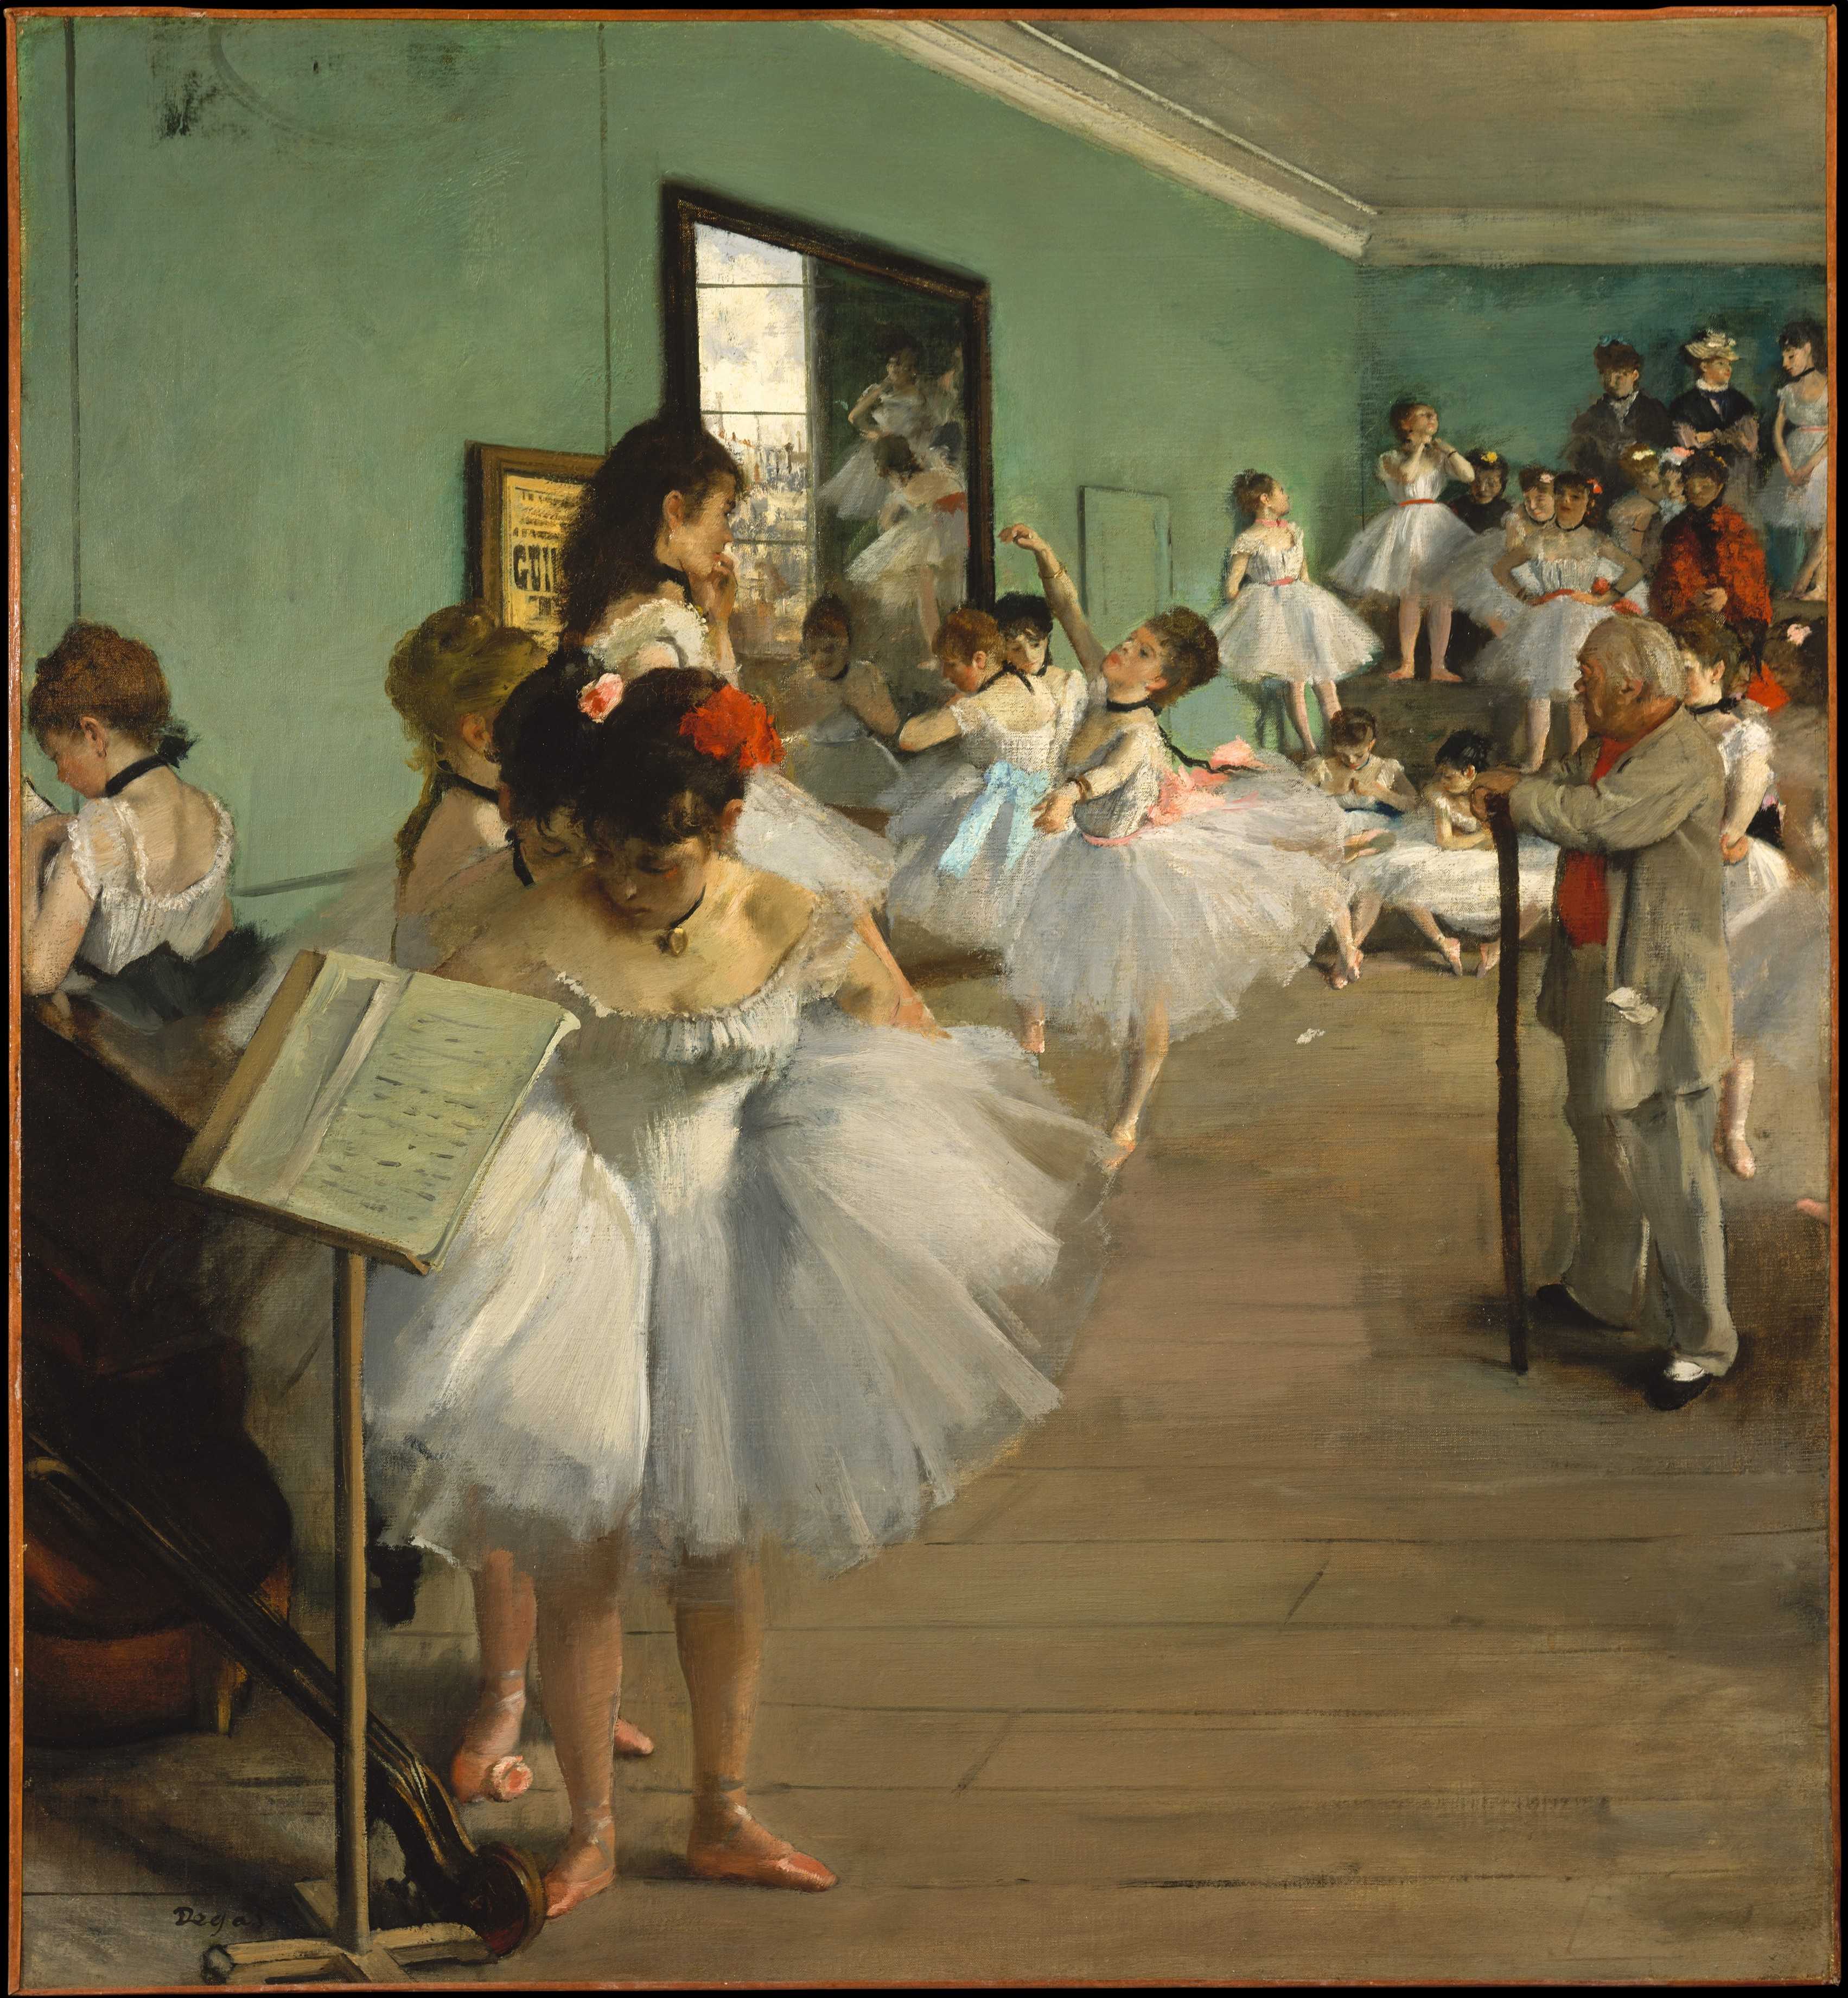 Find out more about Edgar Degas - The Dance Class